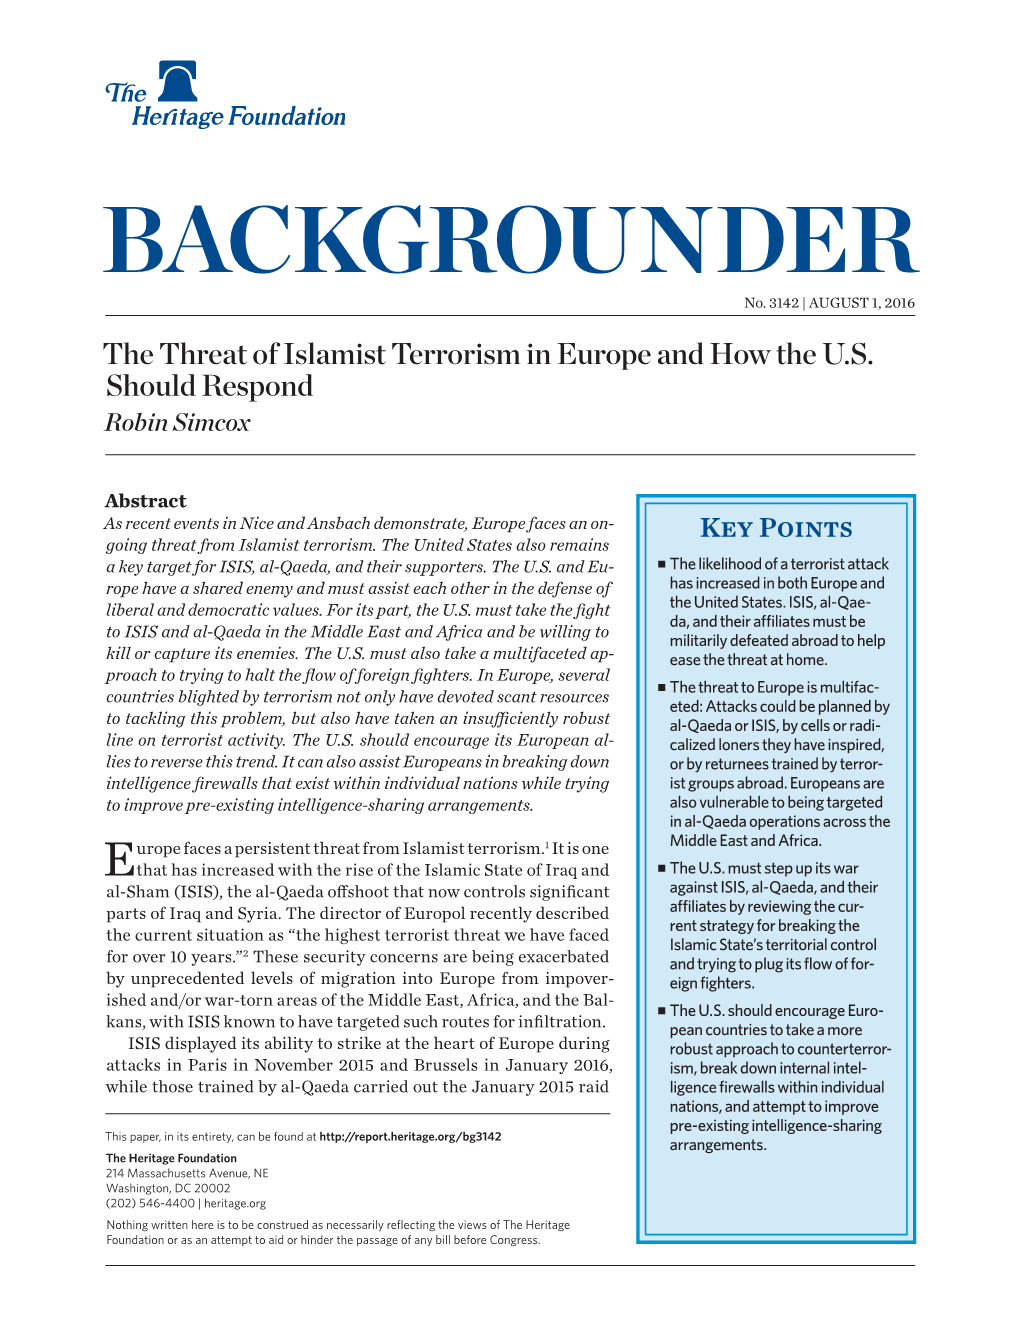 How the U.S. Should Respond to the Islamist Terrorism Threat in Europe